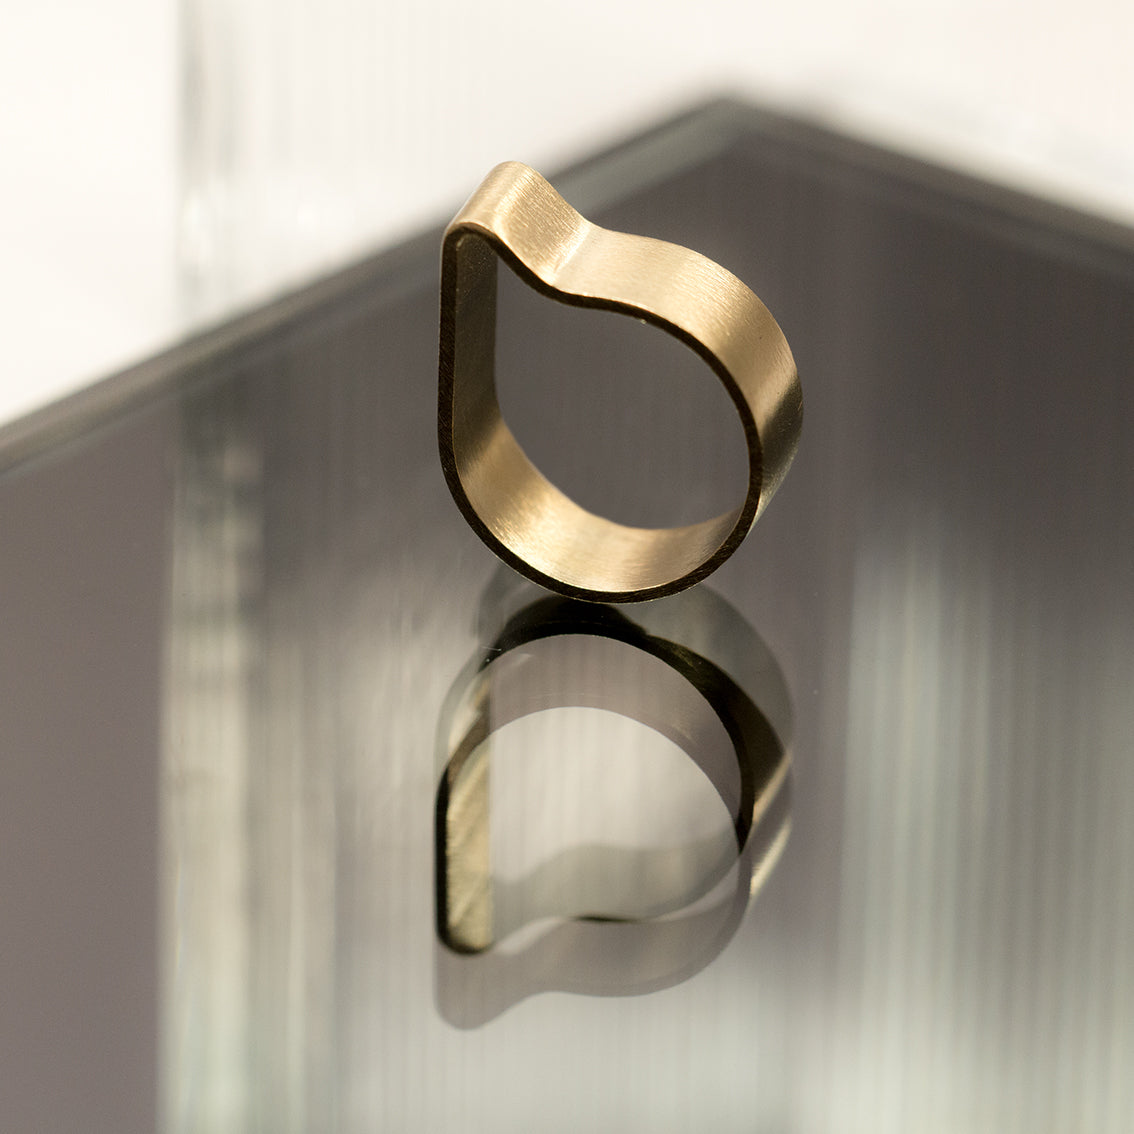 A minimally designed ring is sitting upright on a grey tinted mirror surface with a ribbed clear glass background piece. The reflection of the ring and the fluted glass are visible on the mirror base. The ring has a very simple design which seems like a brass band curved in the shape of a comma.